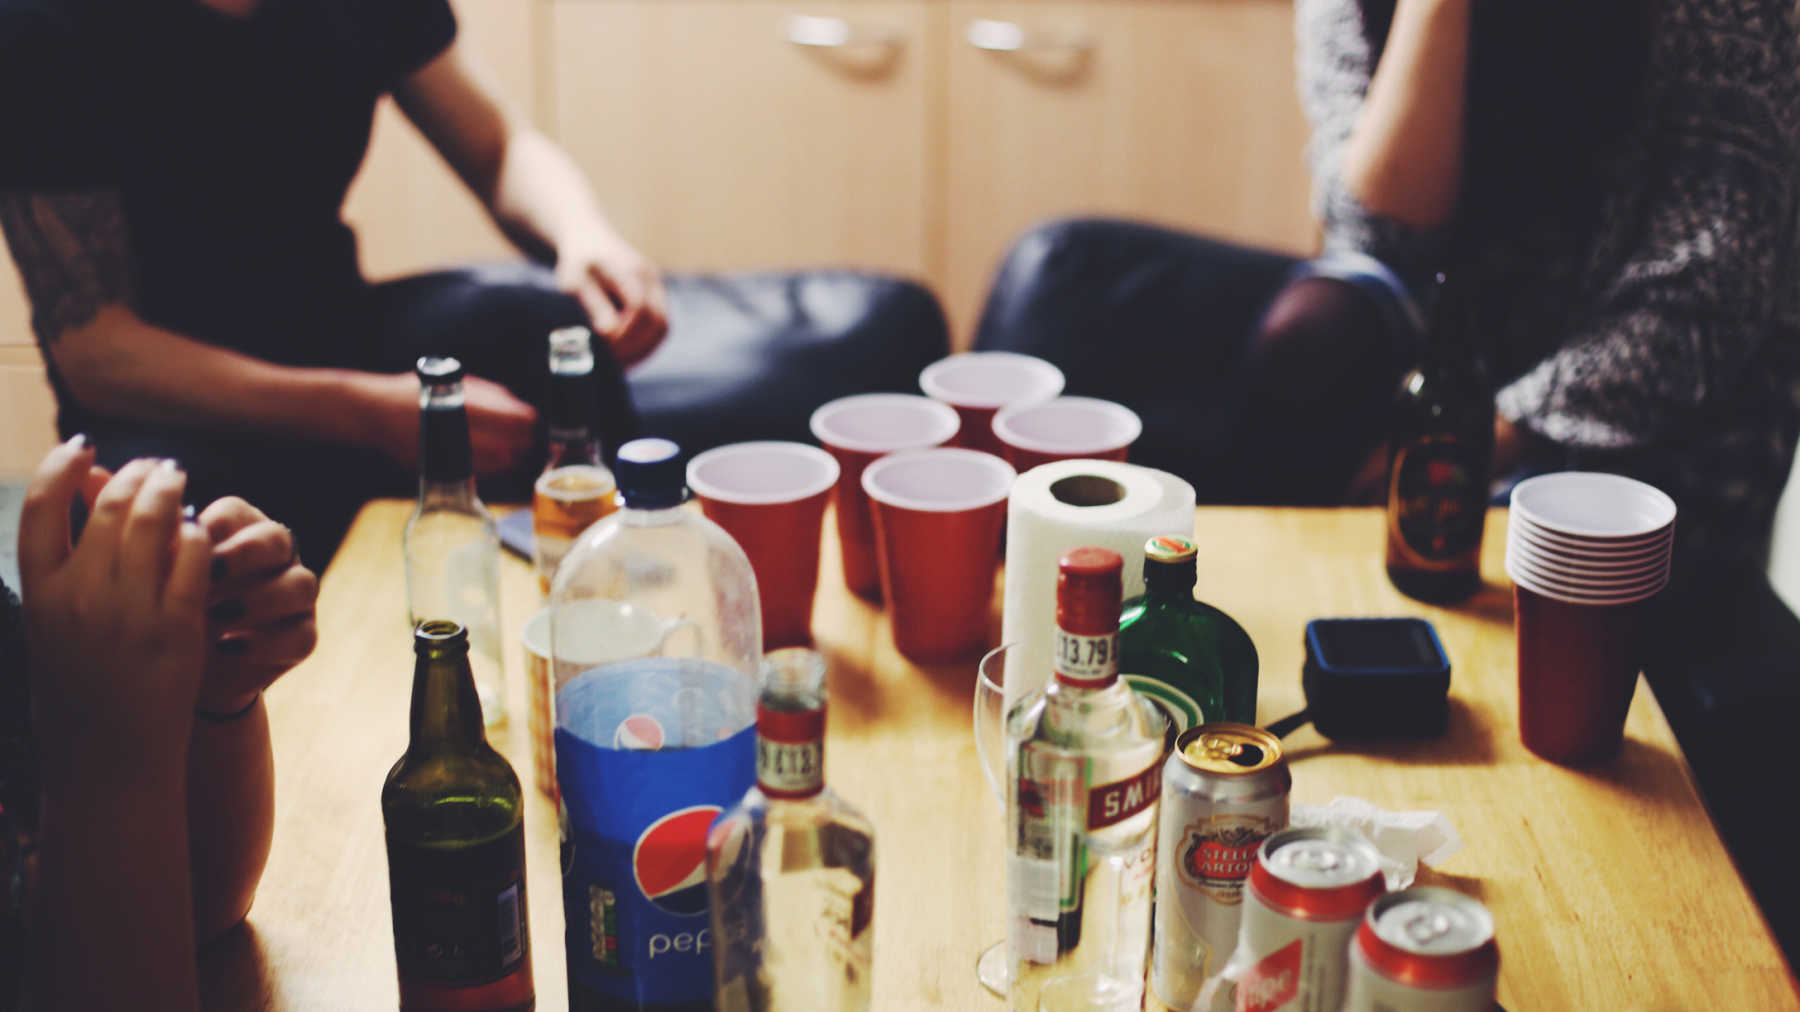 Coffee table with red solo cups, liquor bottles, open and partially consumed beer bottles with youth sitting around it.